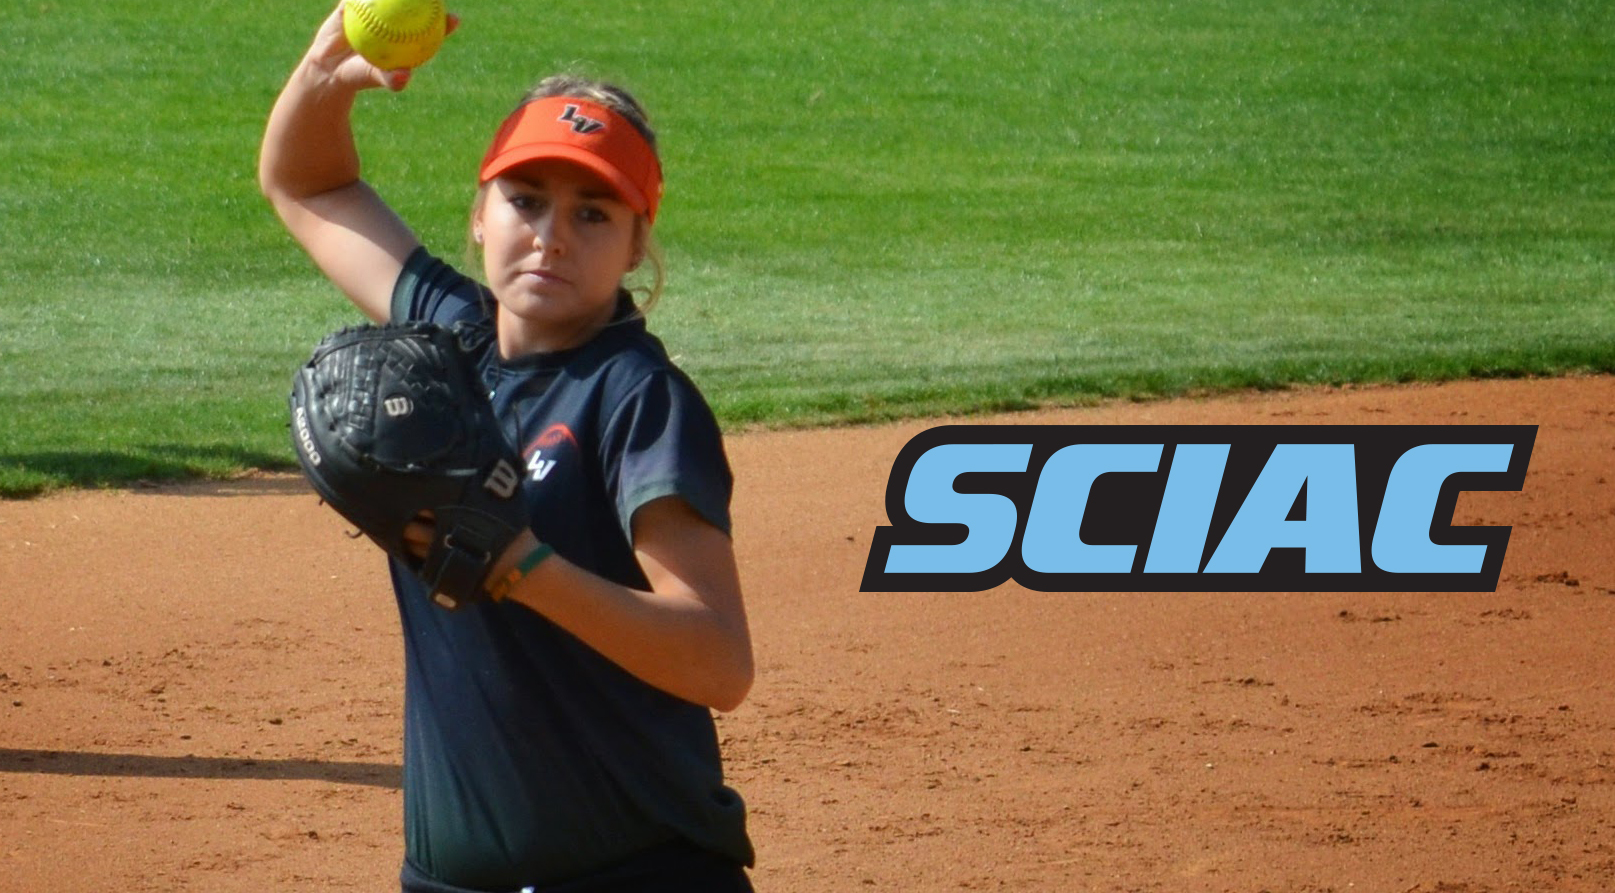 Jaquess named SCIAC Athlete of the Week